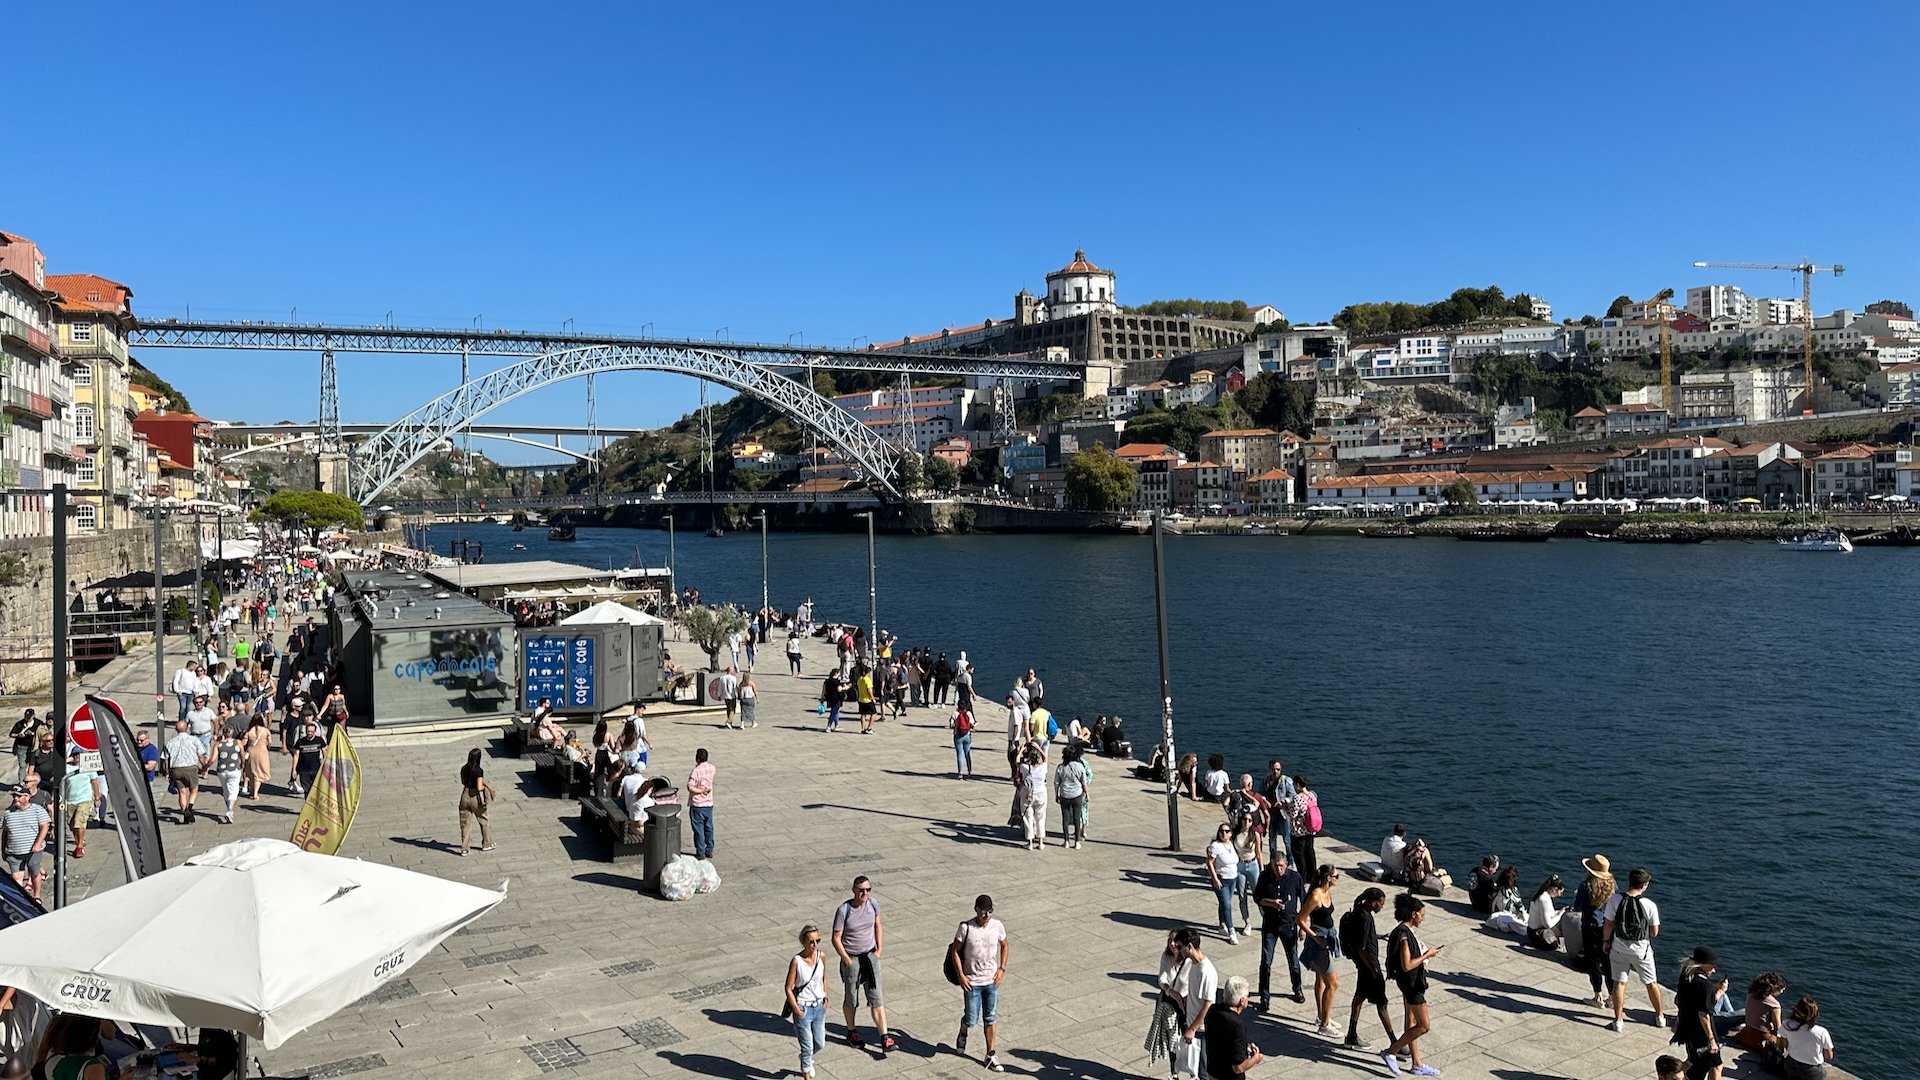  The riverfront on the Porto side was even busier than on the Gaia side. It was a lovely day.  